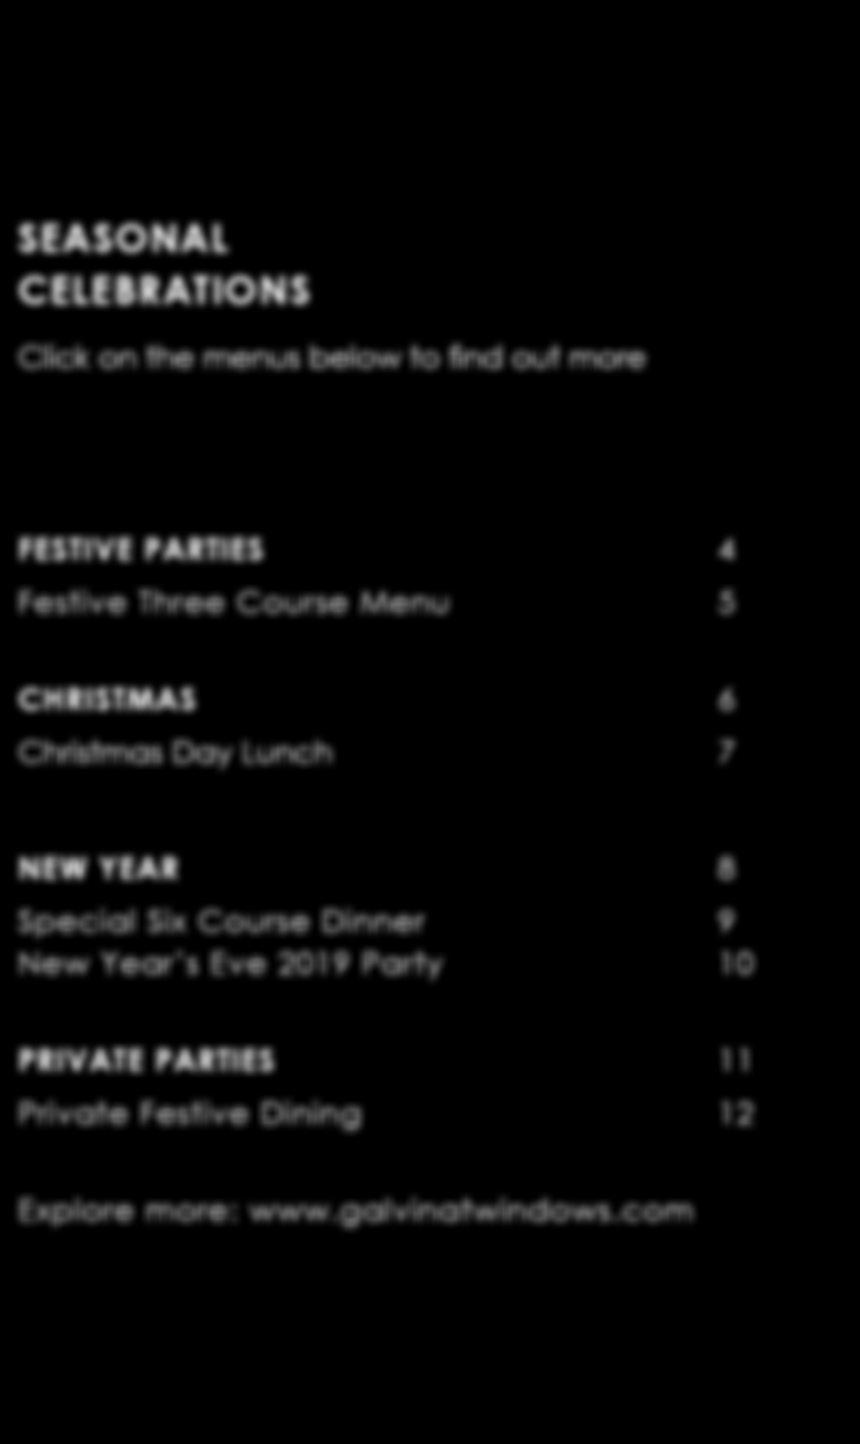 Lunch 7 NEW YEAR 8 Special Six Course Dinner 9 New Year s Eve 2019 Party 10